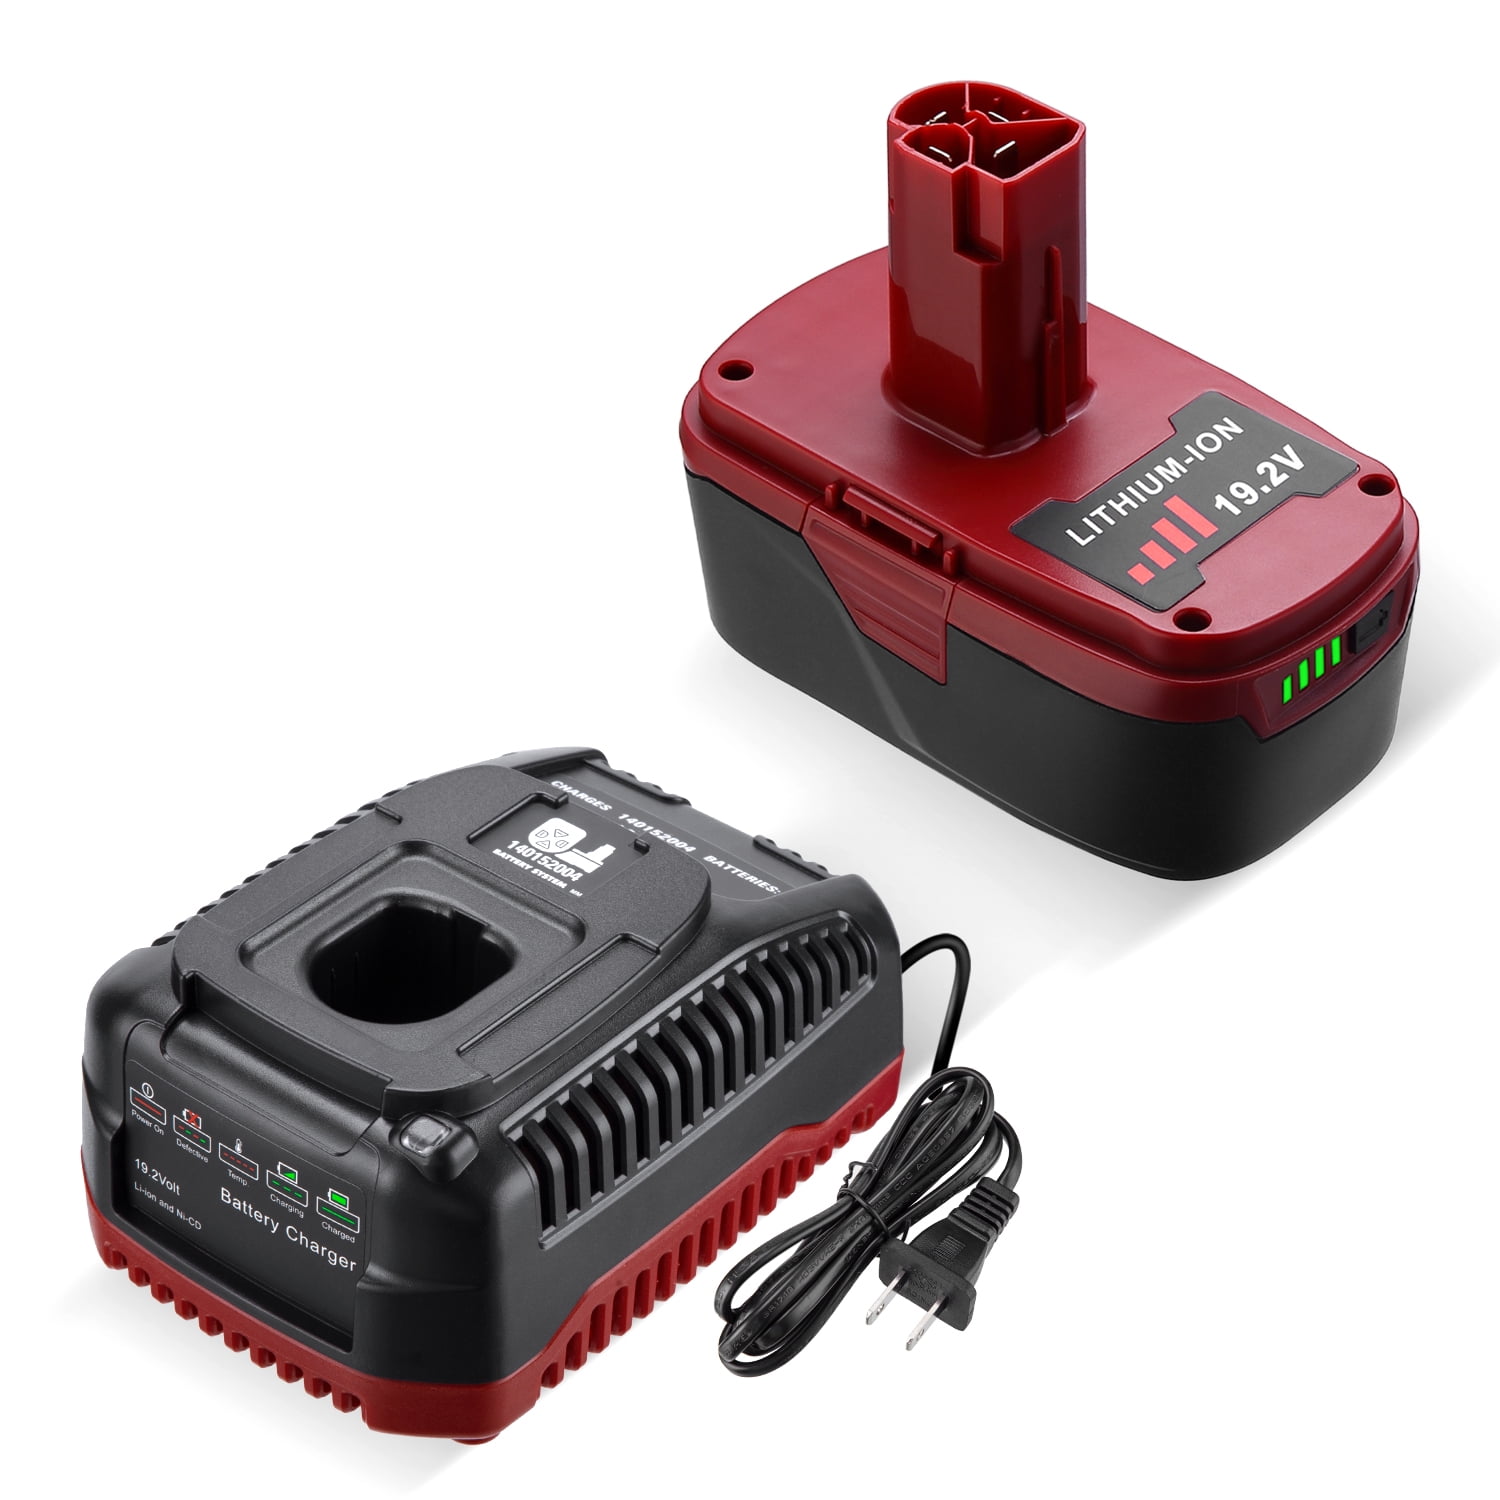 Details about   For Craftsman 19.2 Volt C3 Lithium XCP Battery Charger PP2011 11375 130279005 